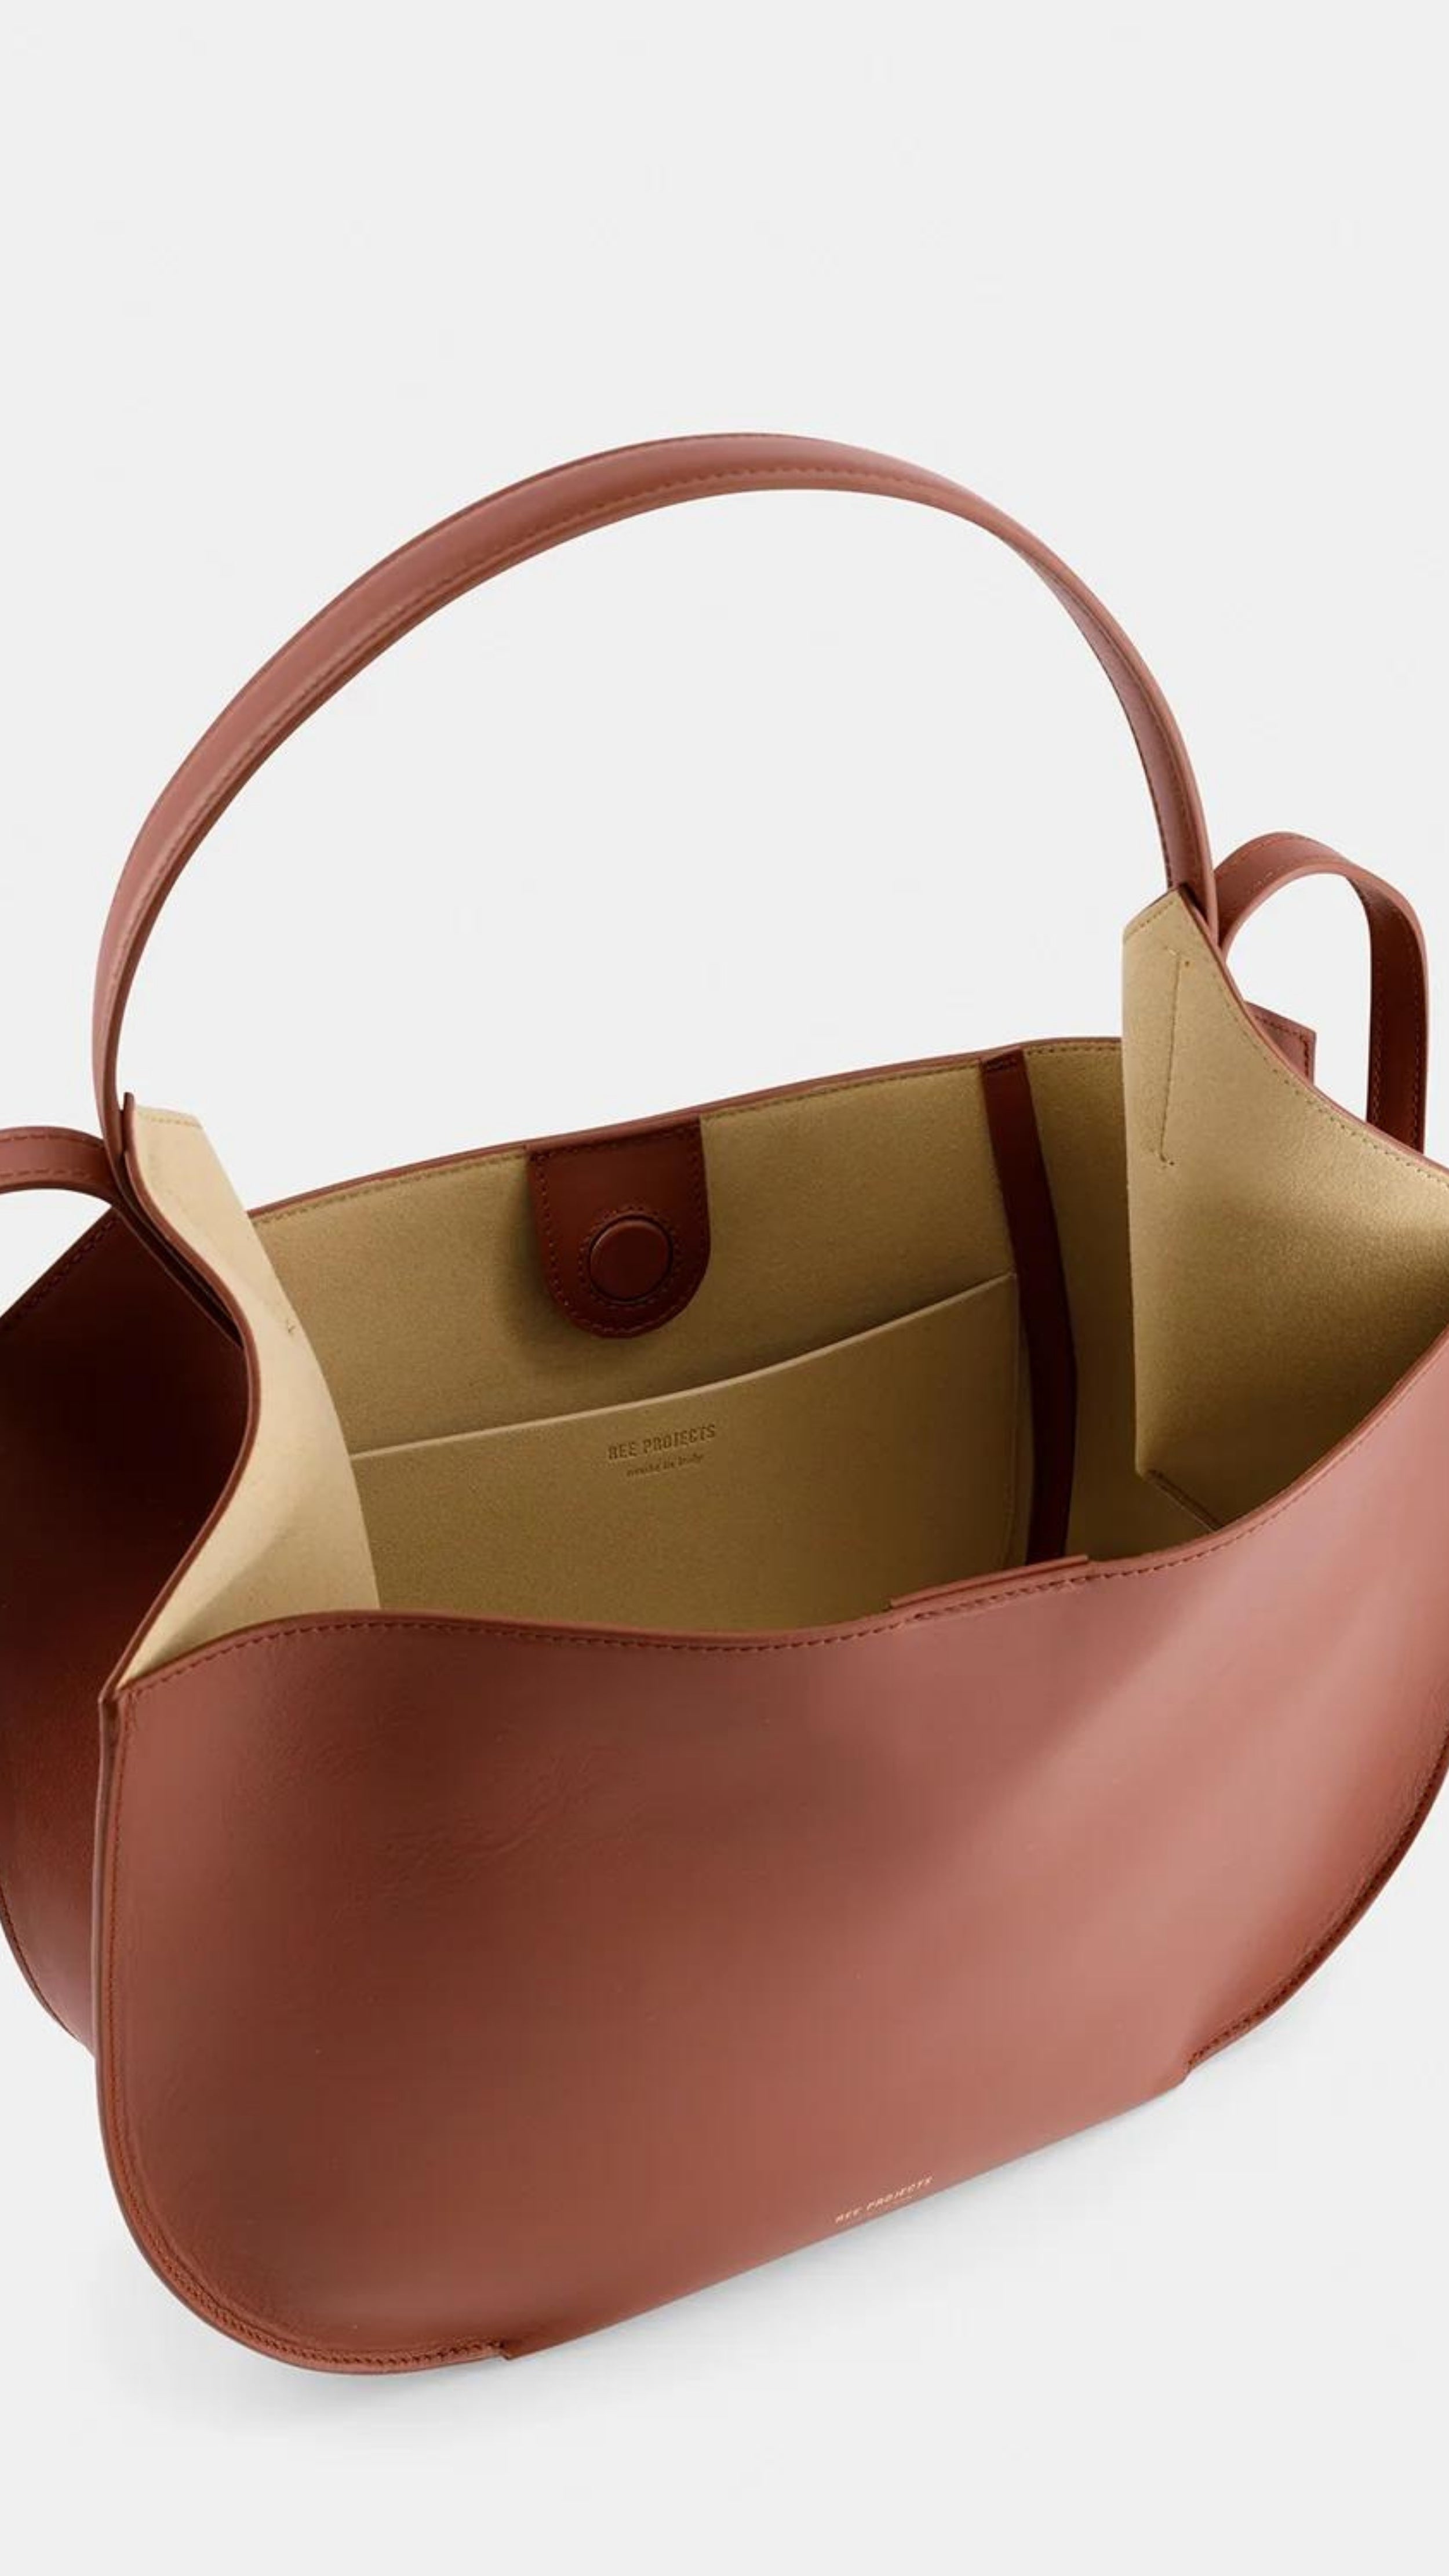 Ree Projects Helen Hobo in Cognac Soft Calf. Medium sized hobo style tote bag made from super soft italian leather. sustainably made in a cognac color. View of the interior.